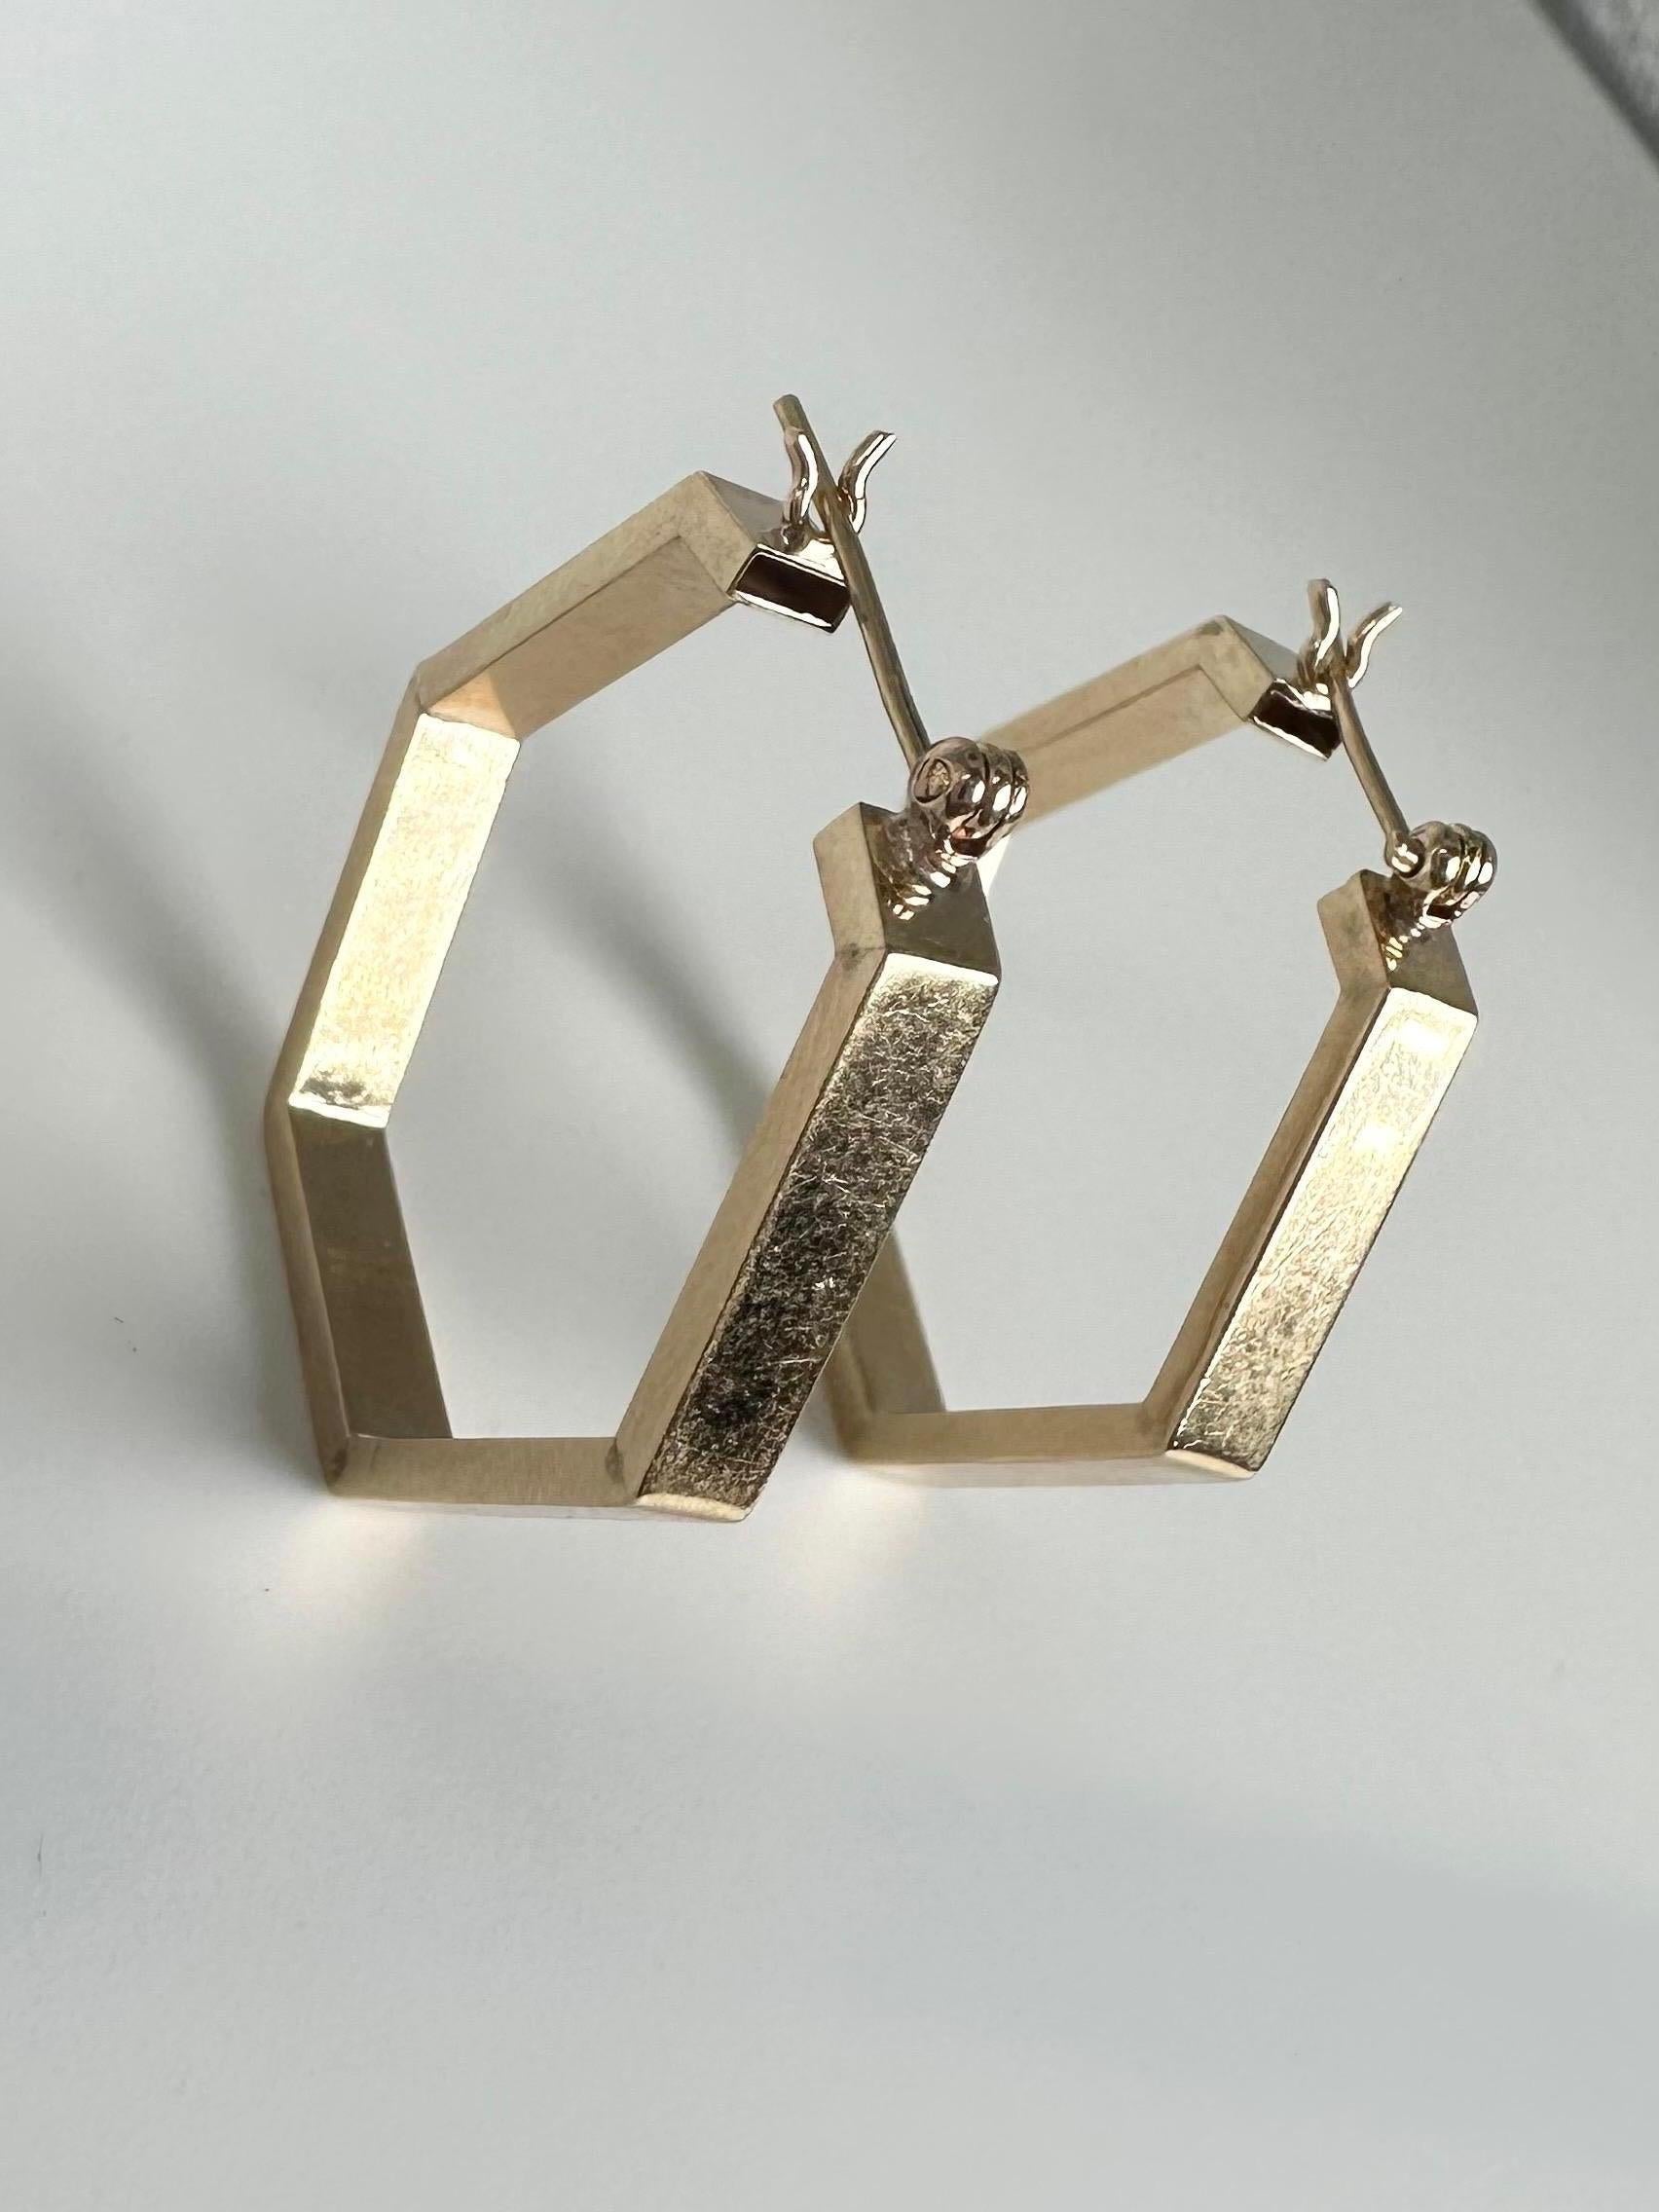 Honeycomb hoop earrings 14KT gold geometric earrings modern minimalistic In Excellent Condition For Sale In Jupiter, FL